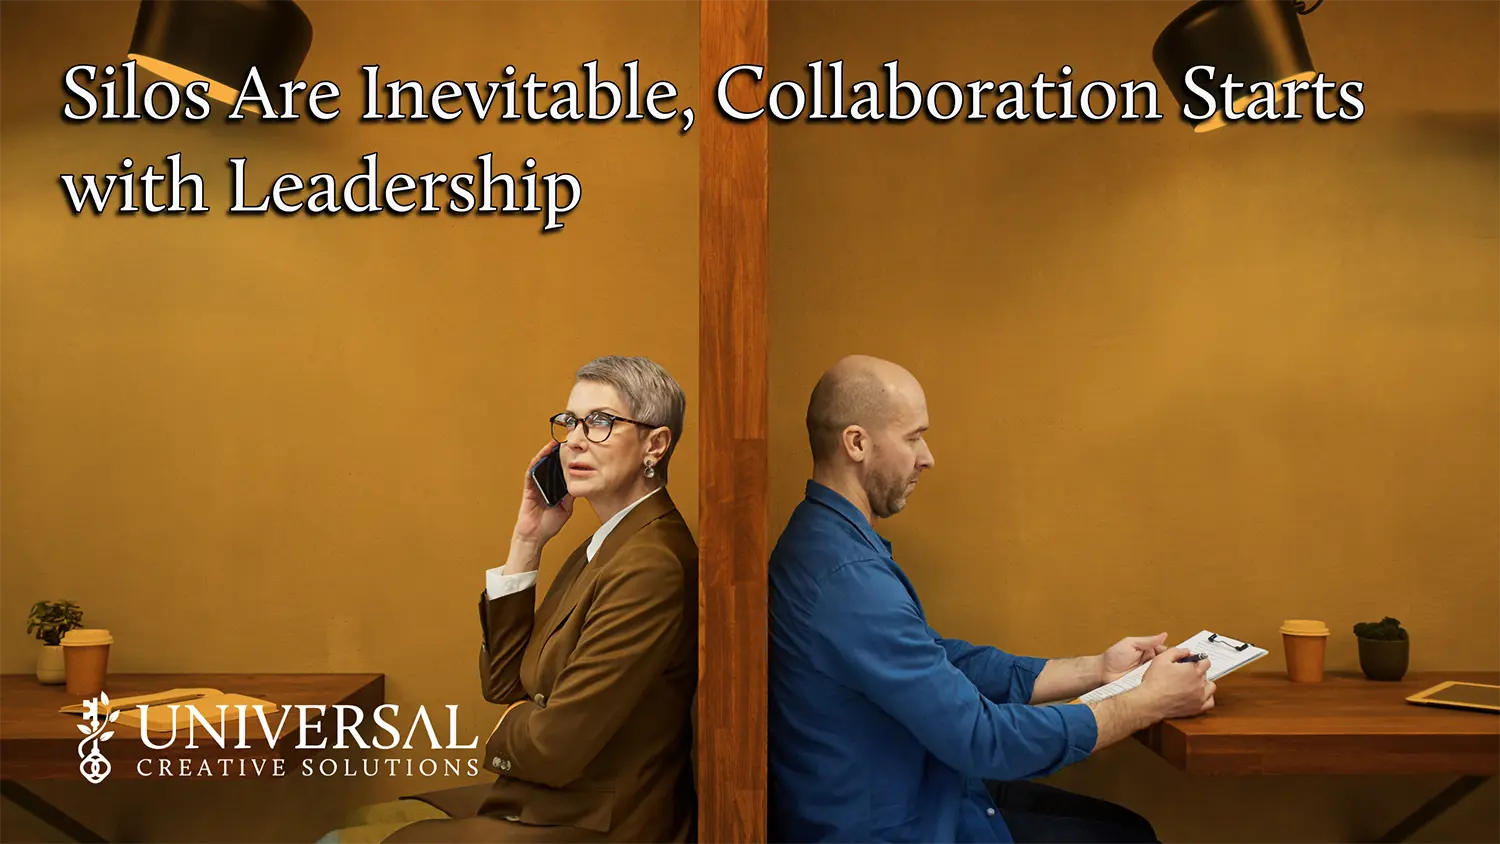 Silos Are Inevitable, Collaboration Starts with Leadership